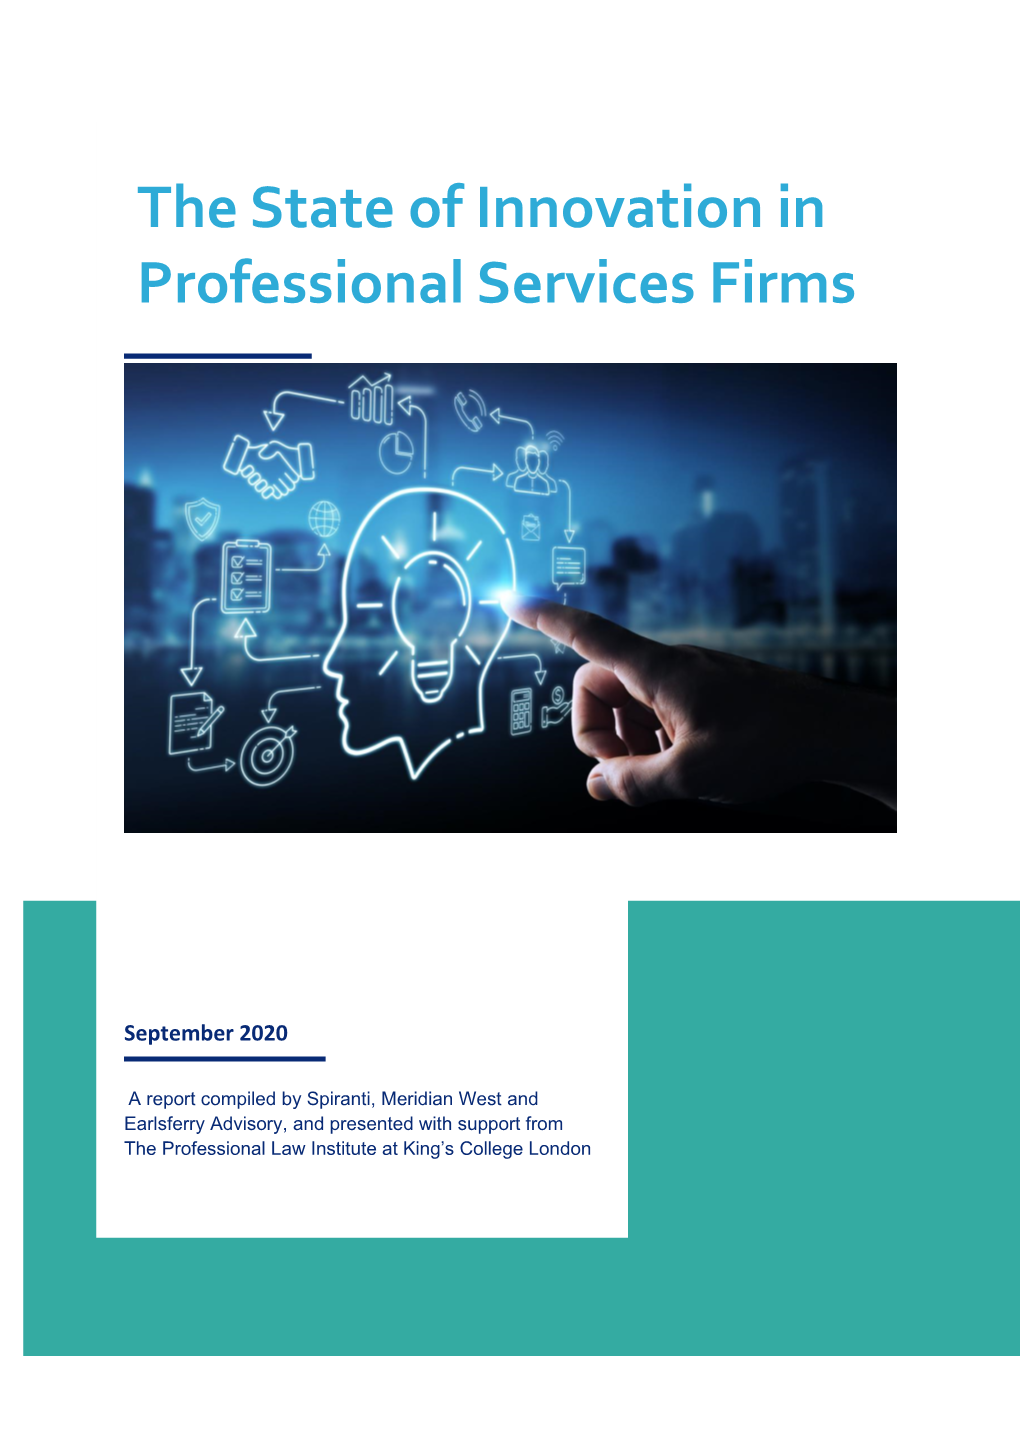 The State of Innovation in Professional Services Firms